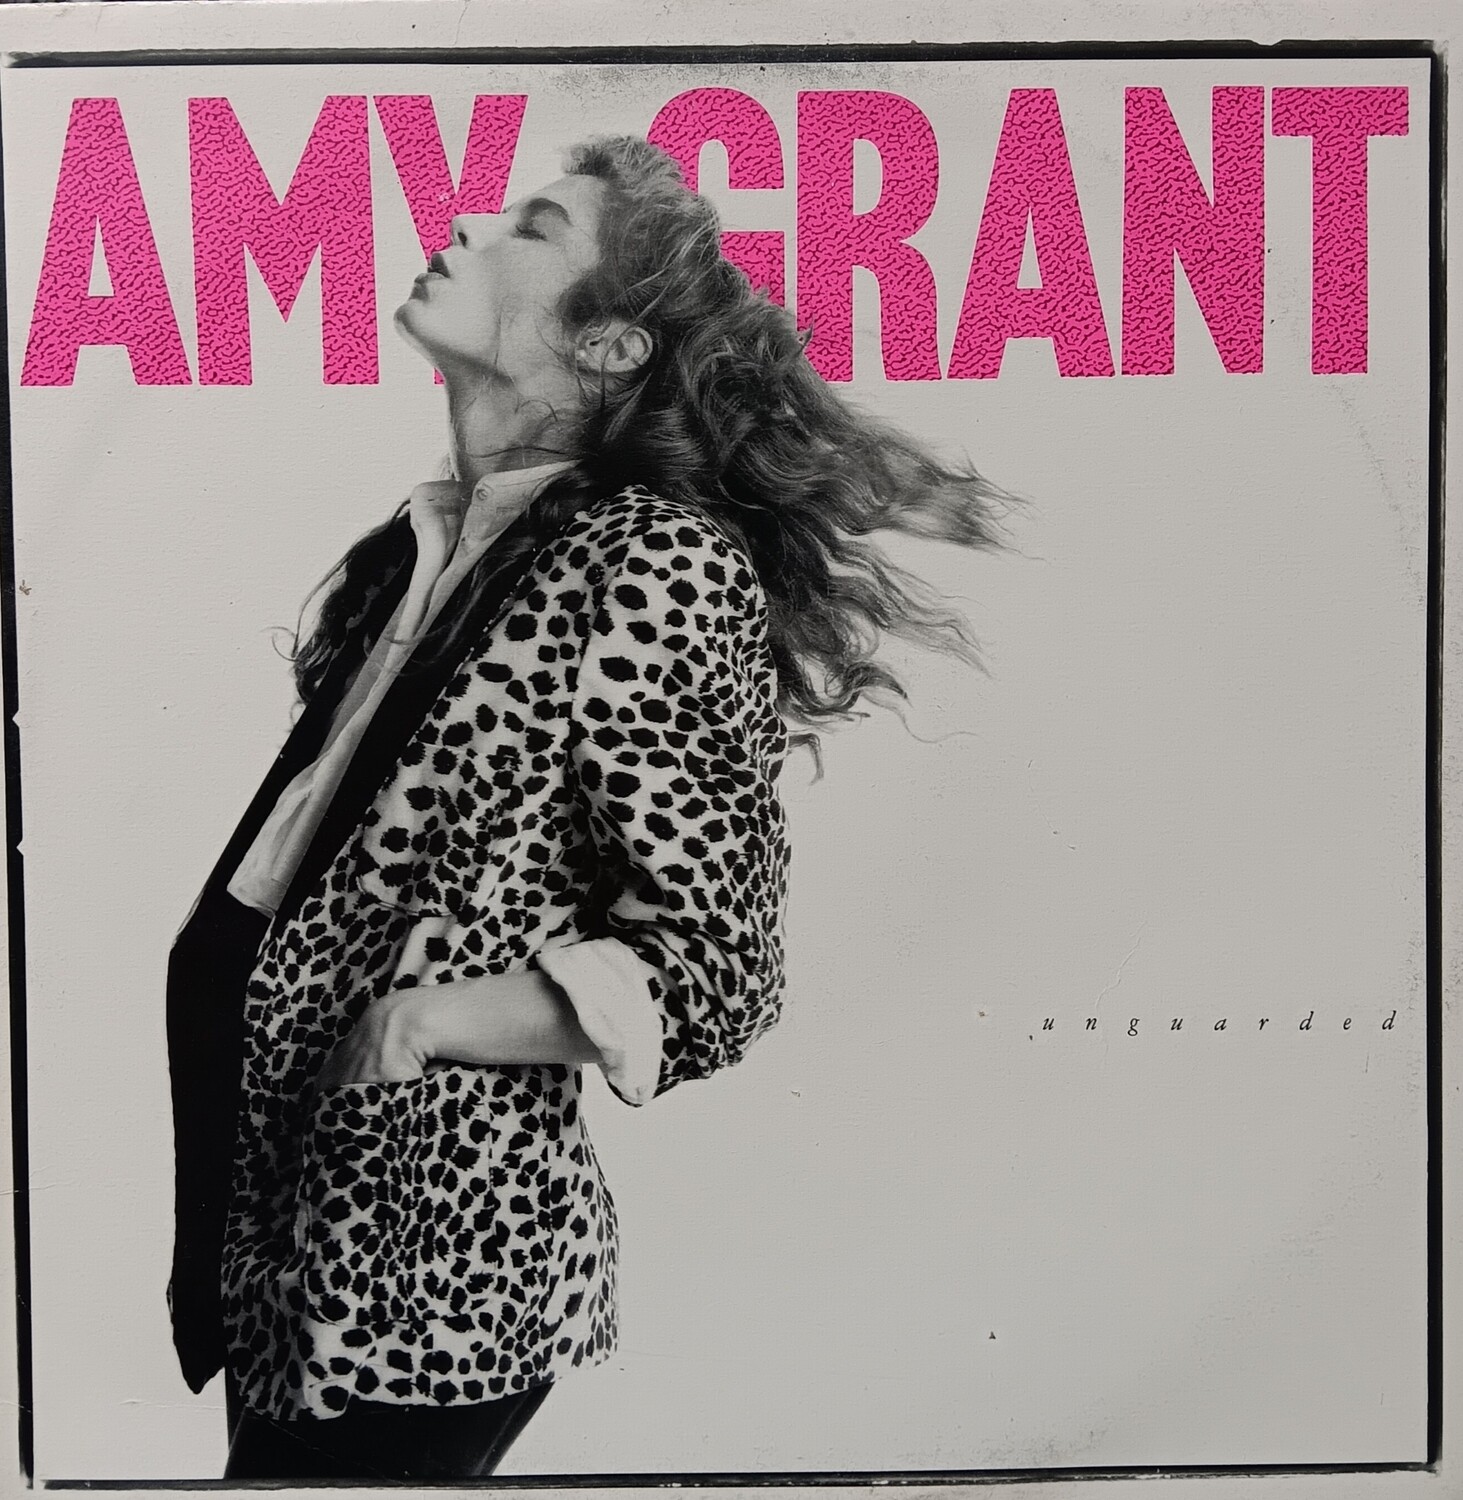 AMY GRANT - Unguarded